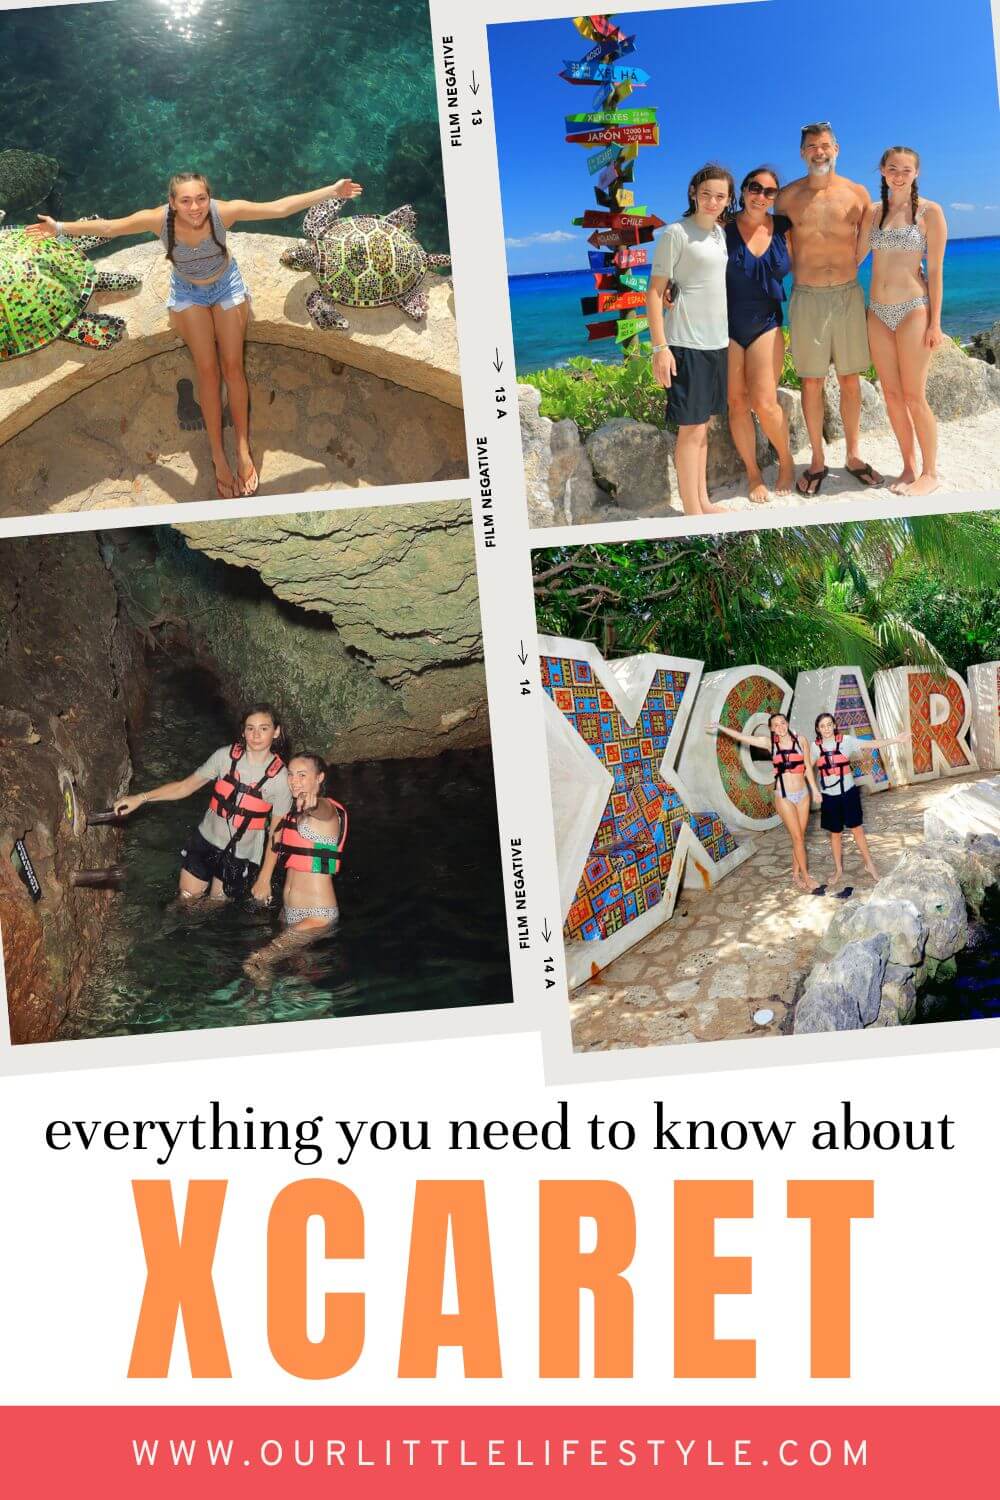 Xcaret park tickets and Tips